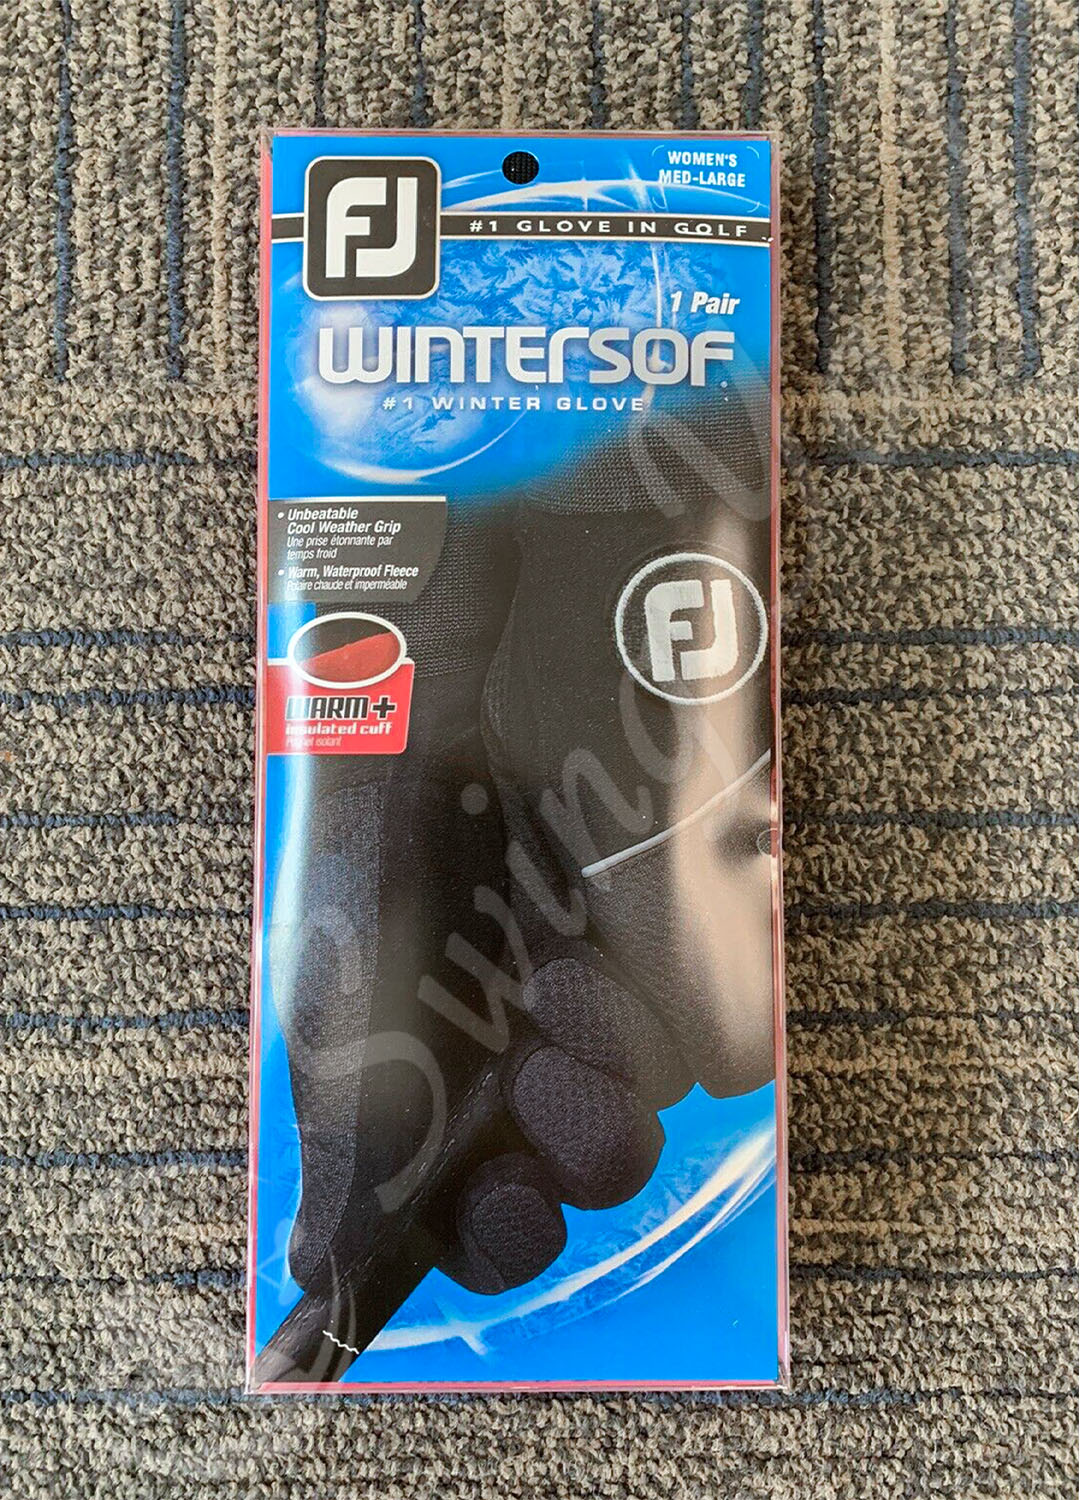 A frontside view of FootJoy women winter sof golf gloves pack on the floor